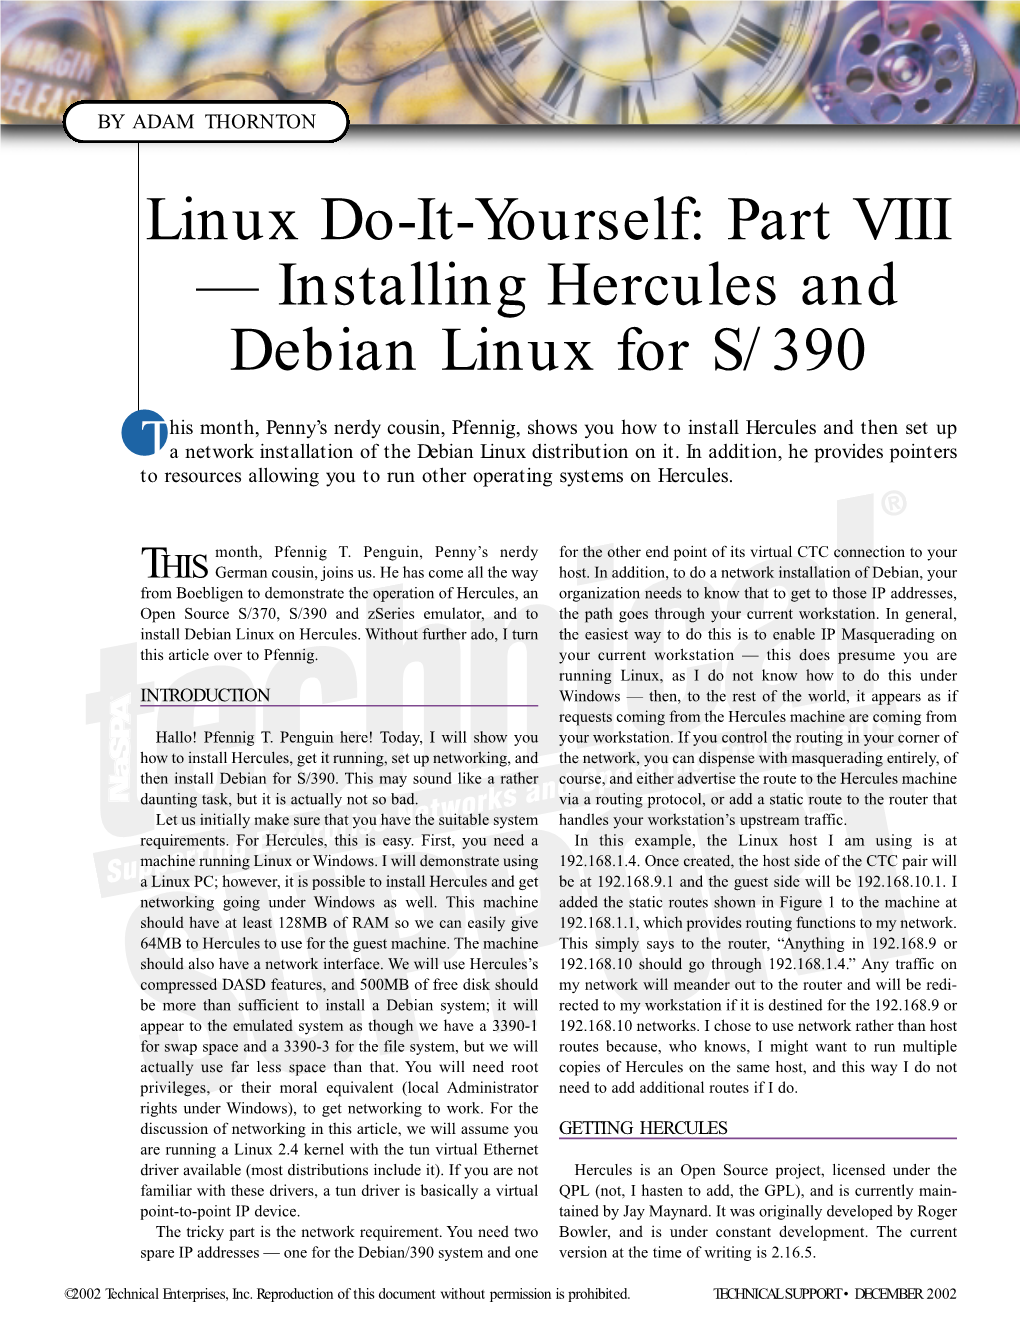 Installing Hercules and Debian Linux for S/390